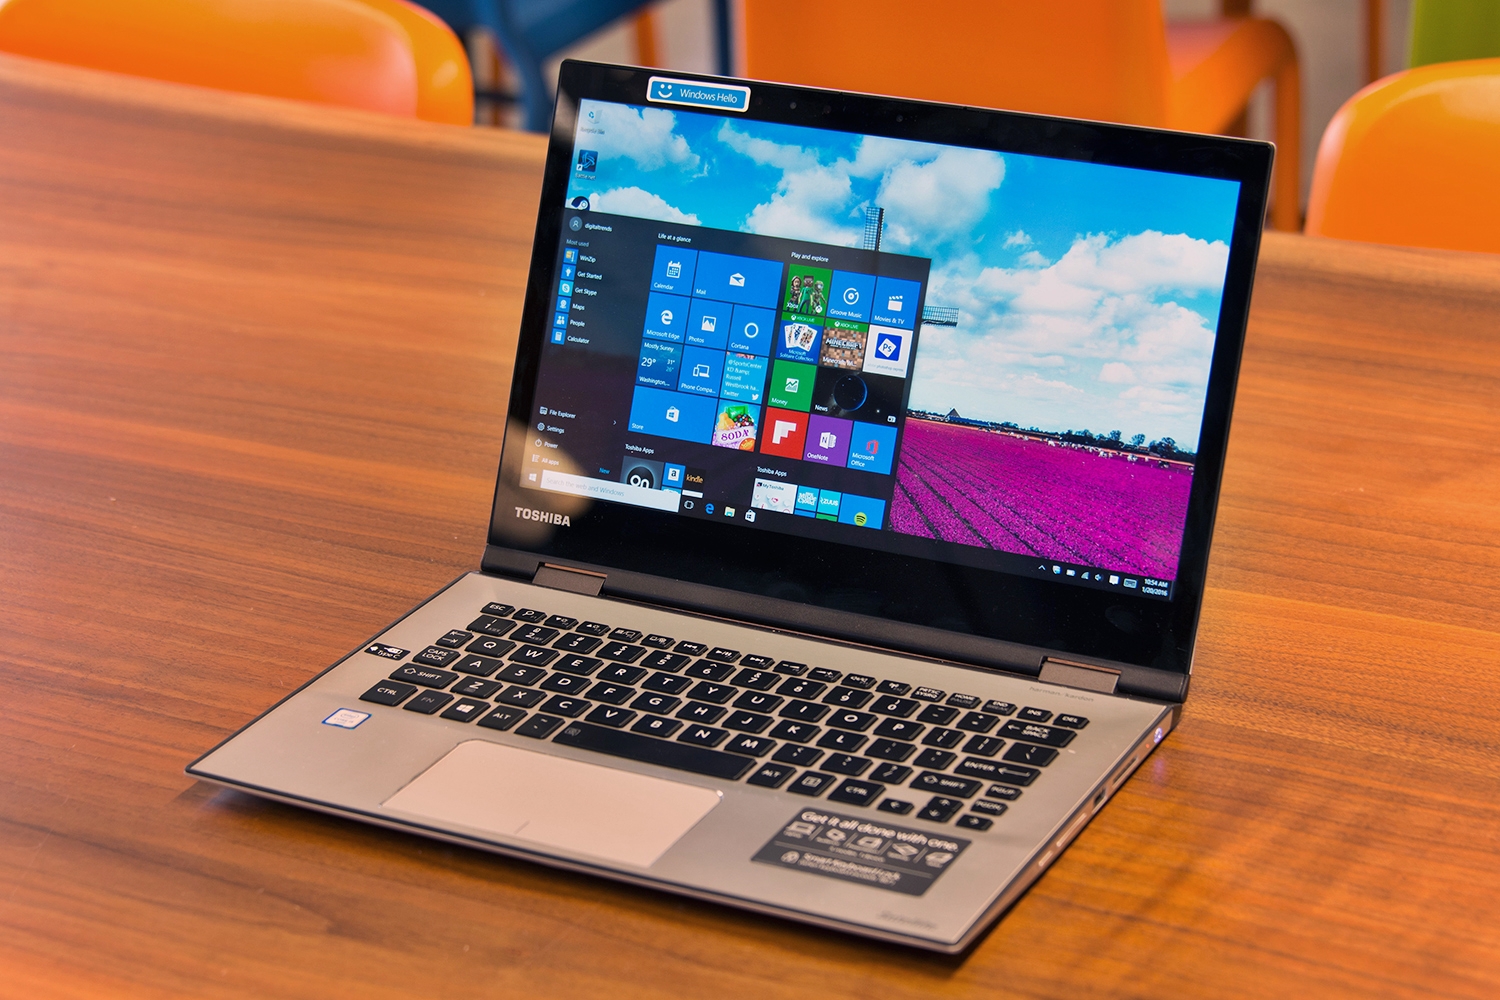 How To Factory Reset A Toshiba Laptop